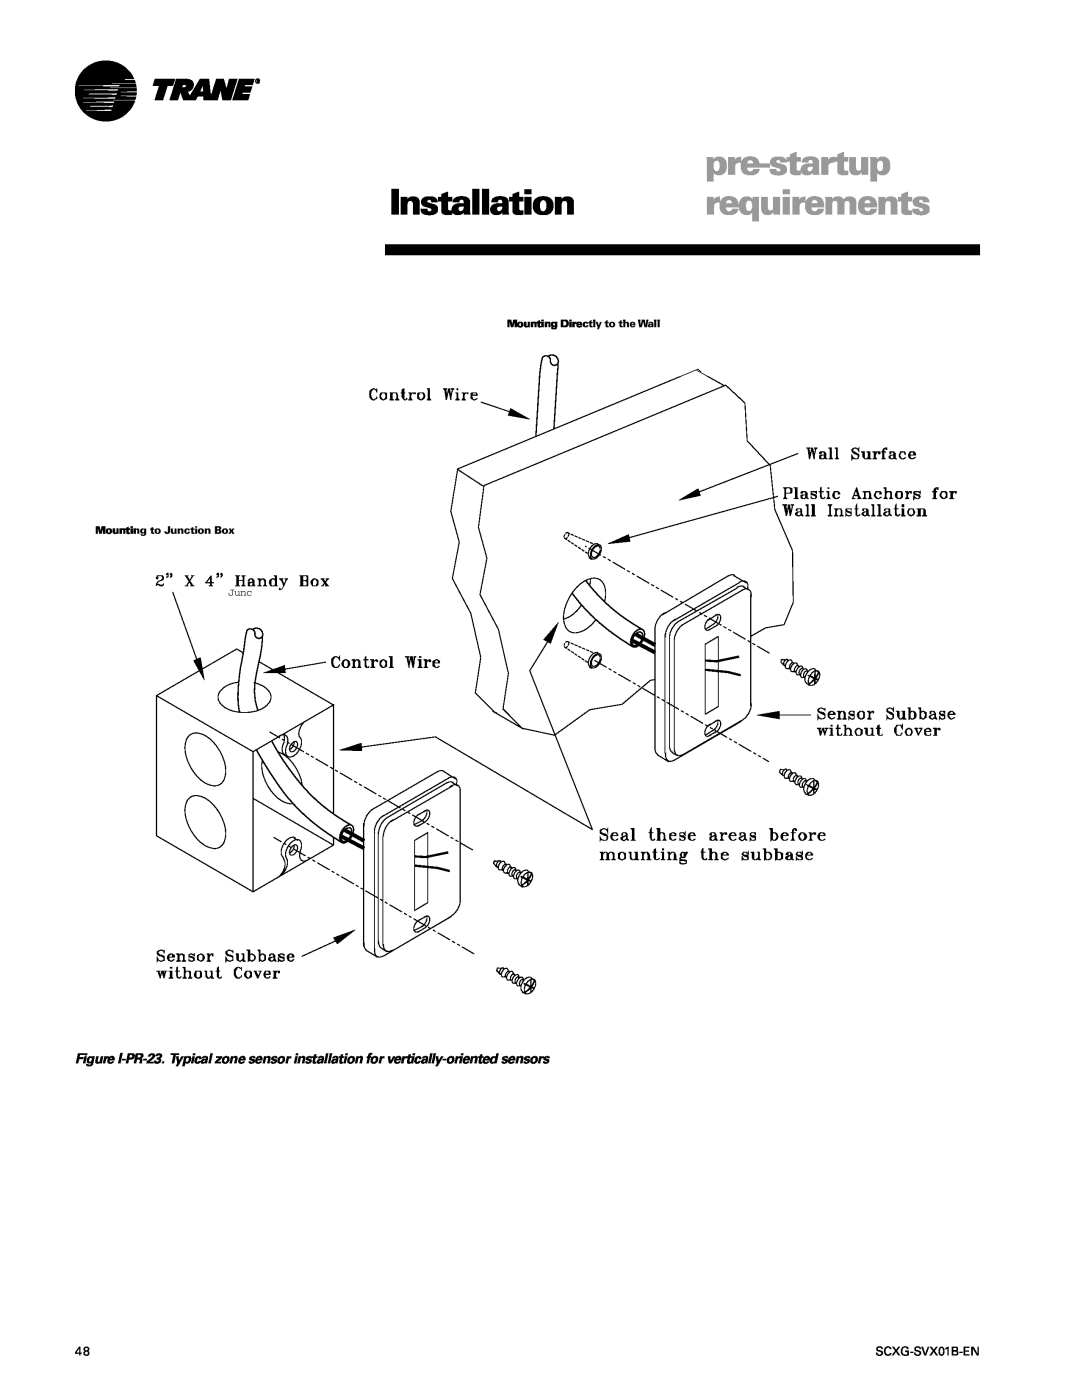 Trane SCXG-SVX01B-EN manual pre-startup, Installation requirements, Mounting Directly to the Wall, Mounting to Junction Box 